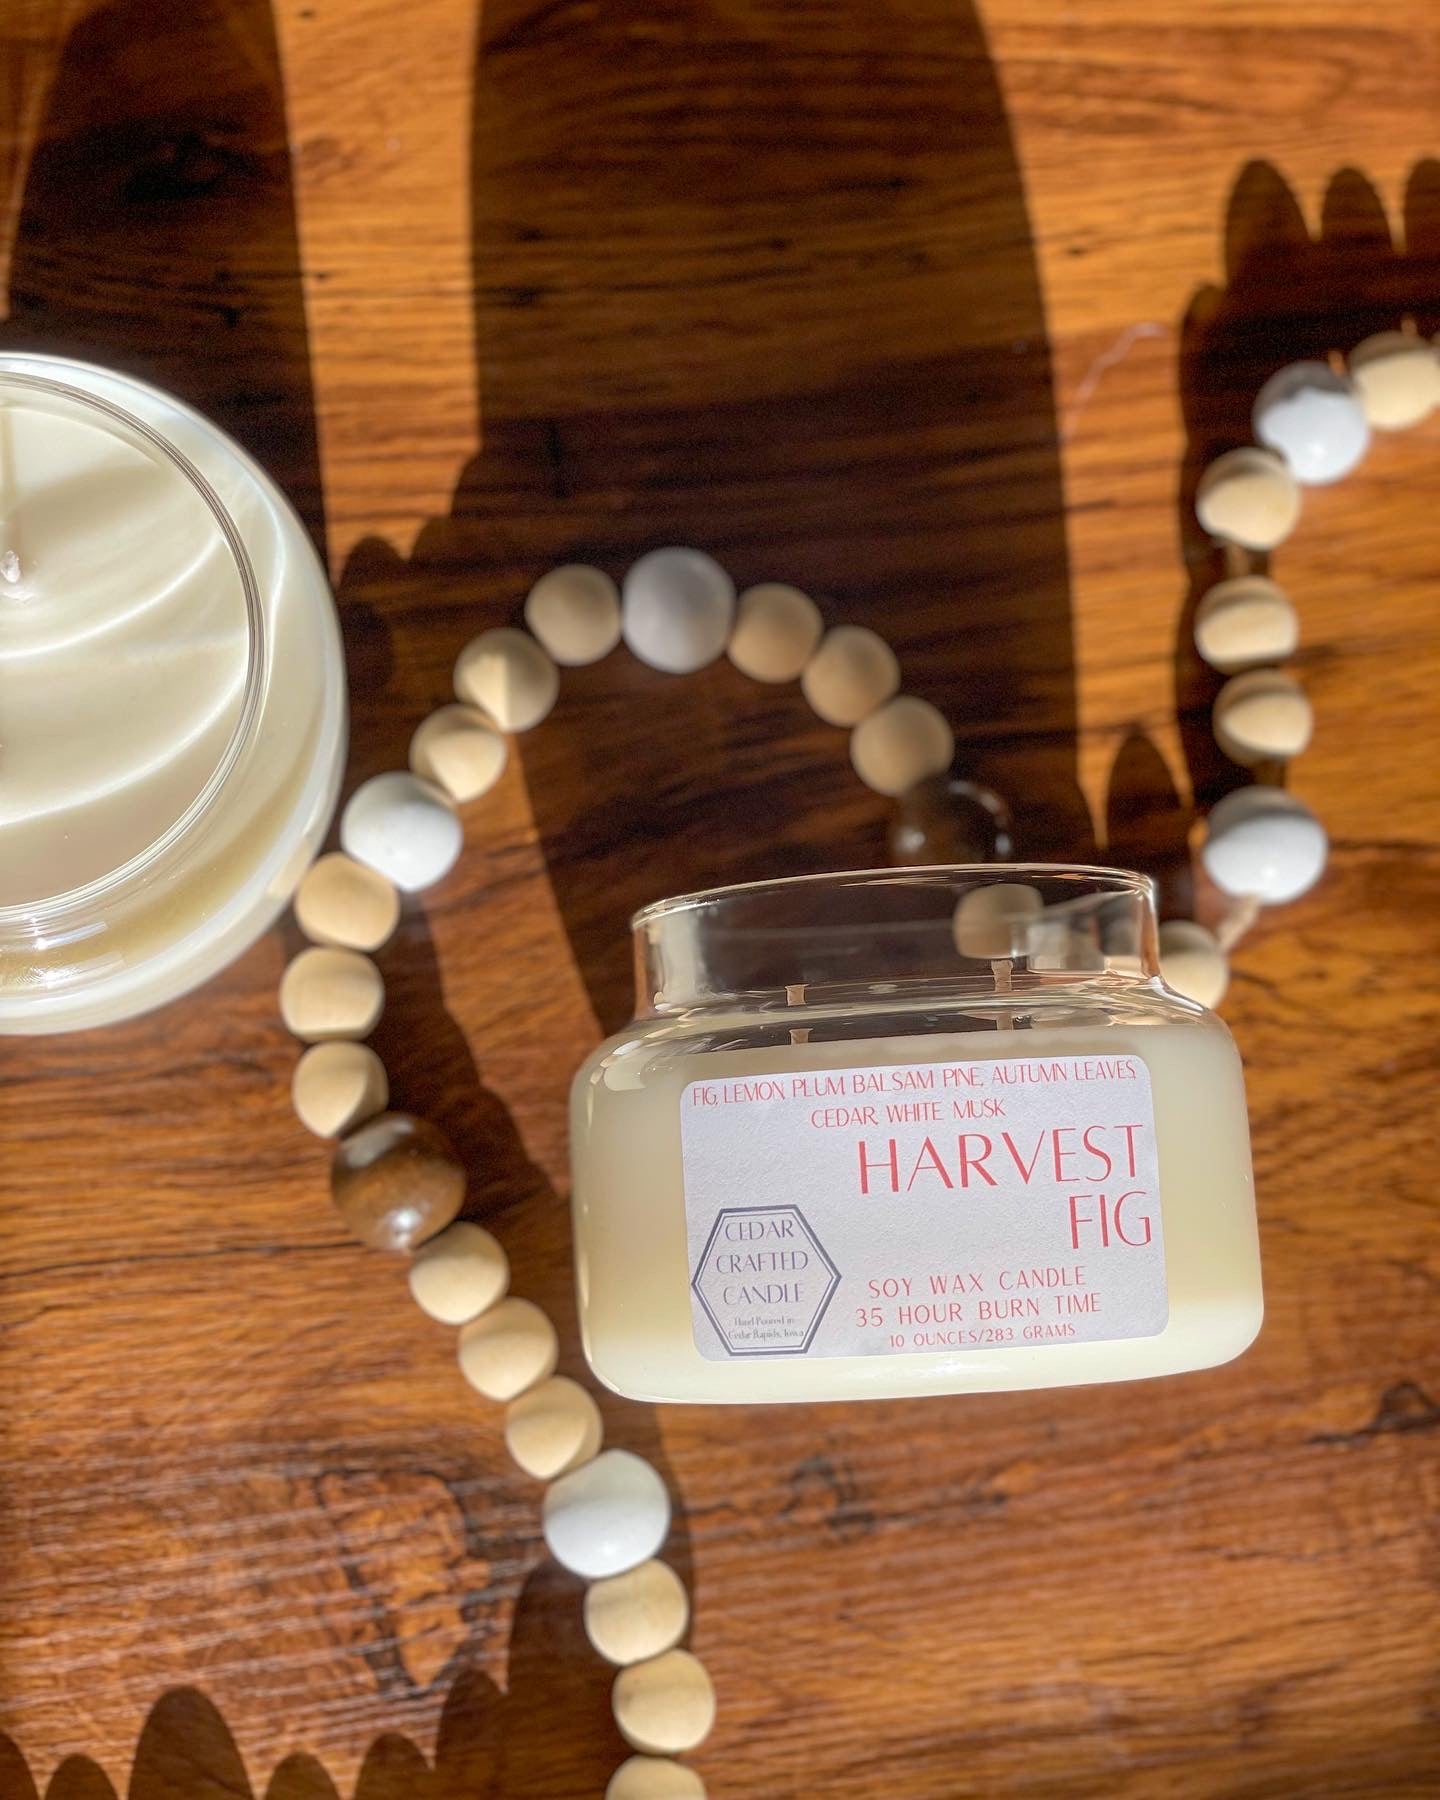 Hand-poured, nontoxic soy candle scented in Harvest Fig